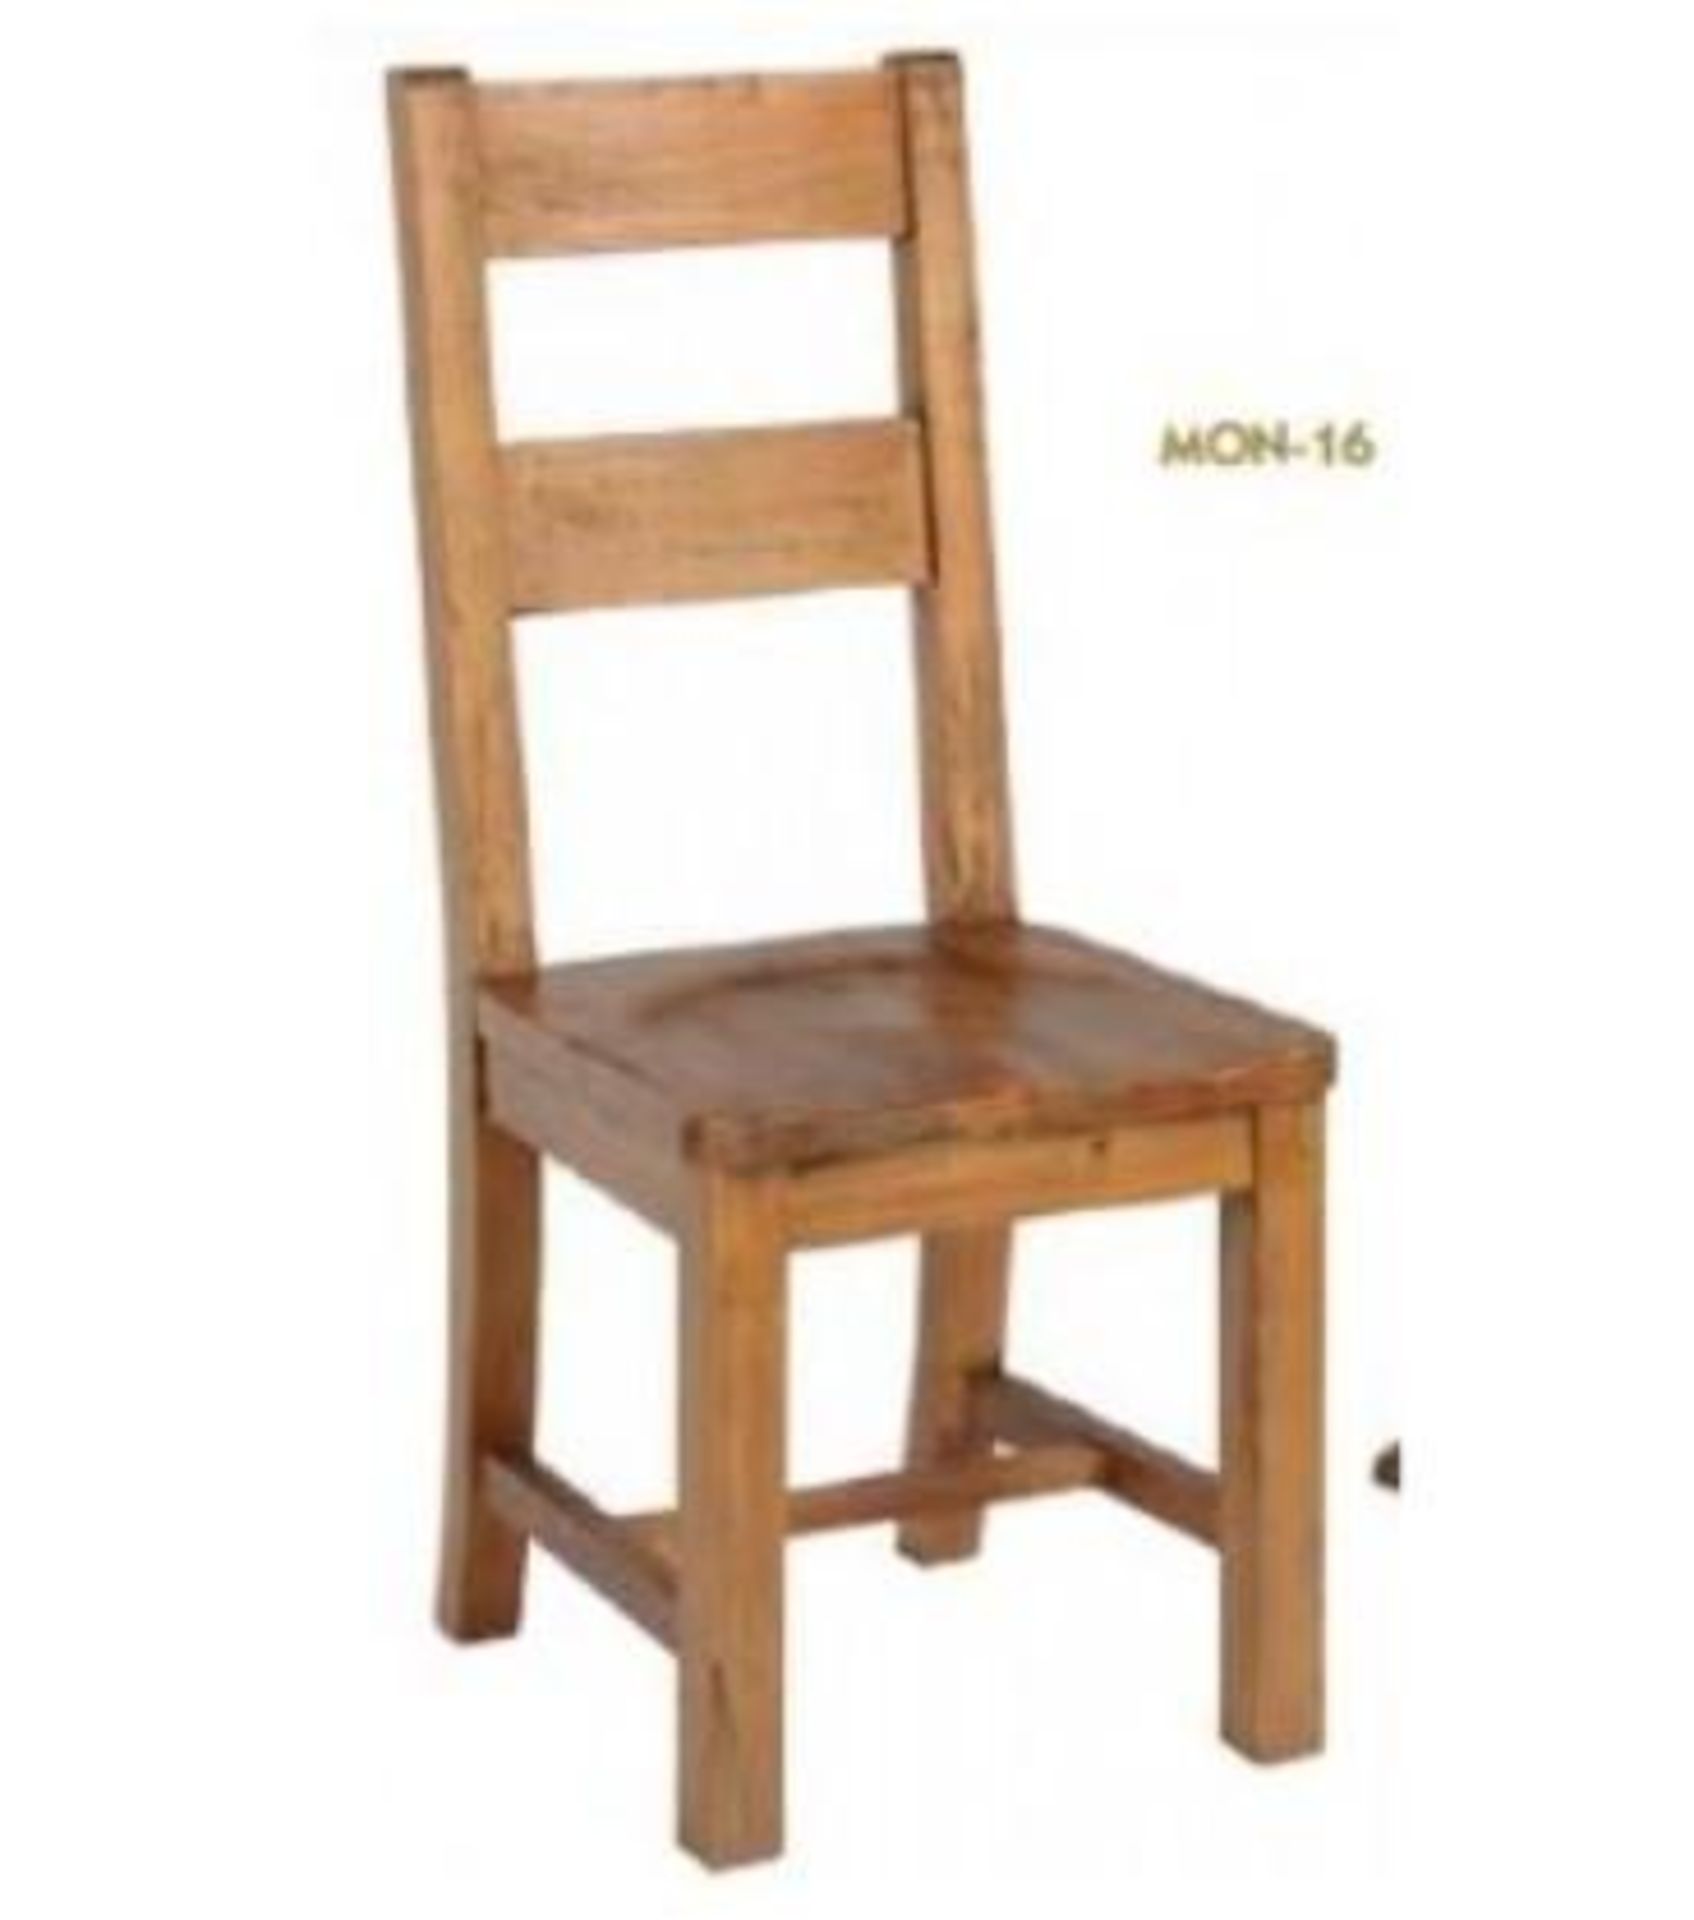 BRAND NEW & BOXED Montana Dining chair